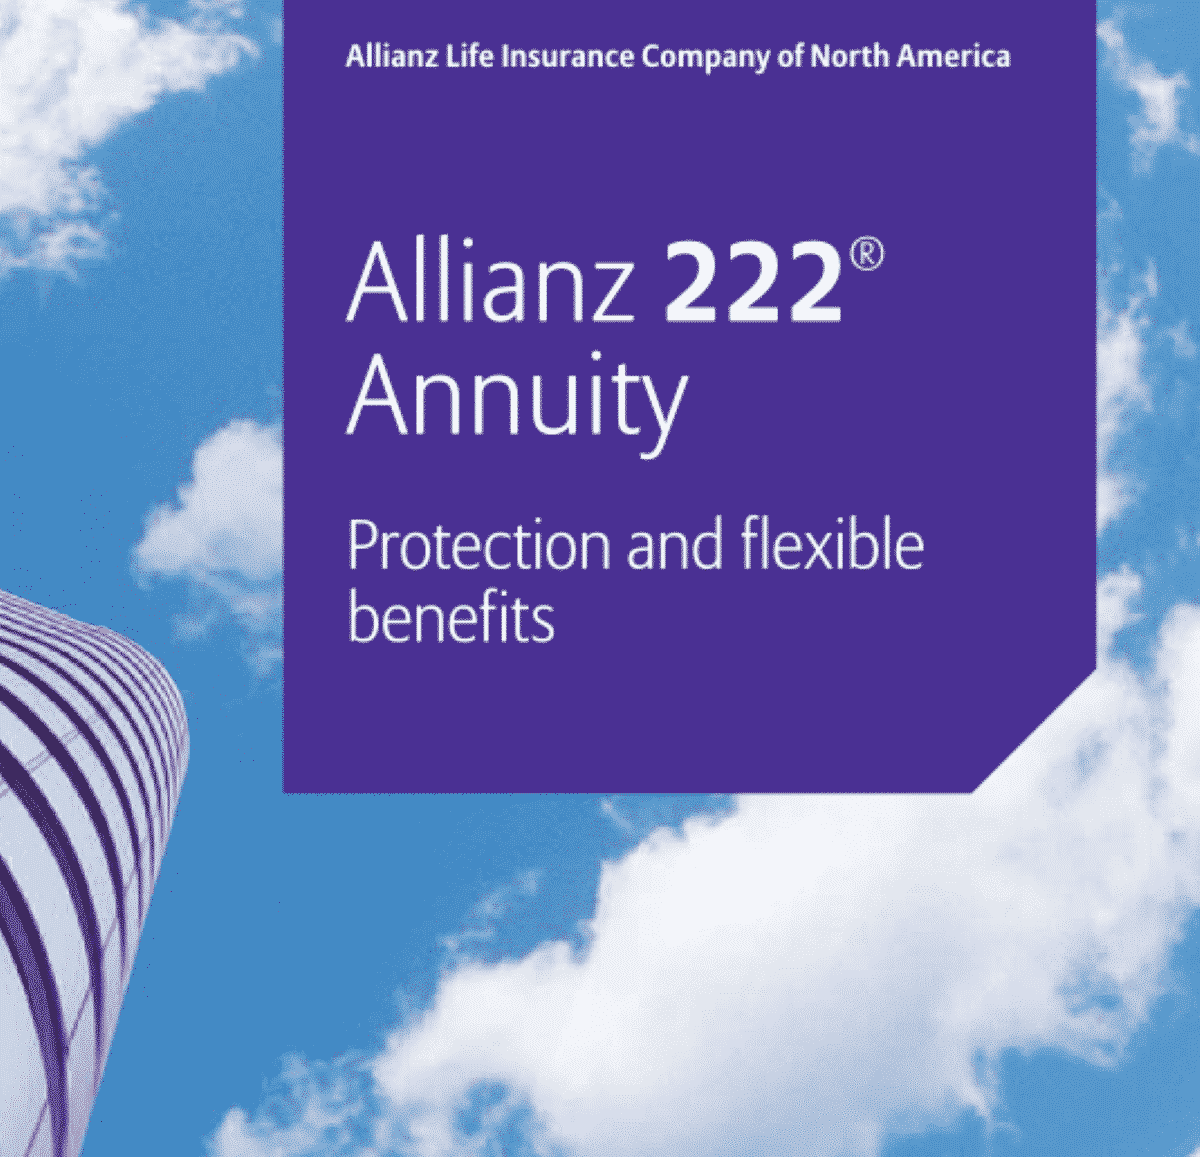 An unbiased allianz 222 review